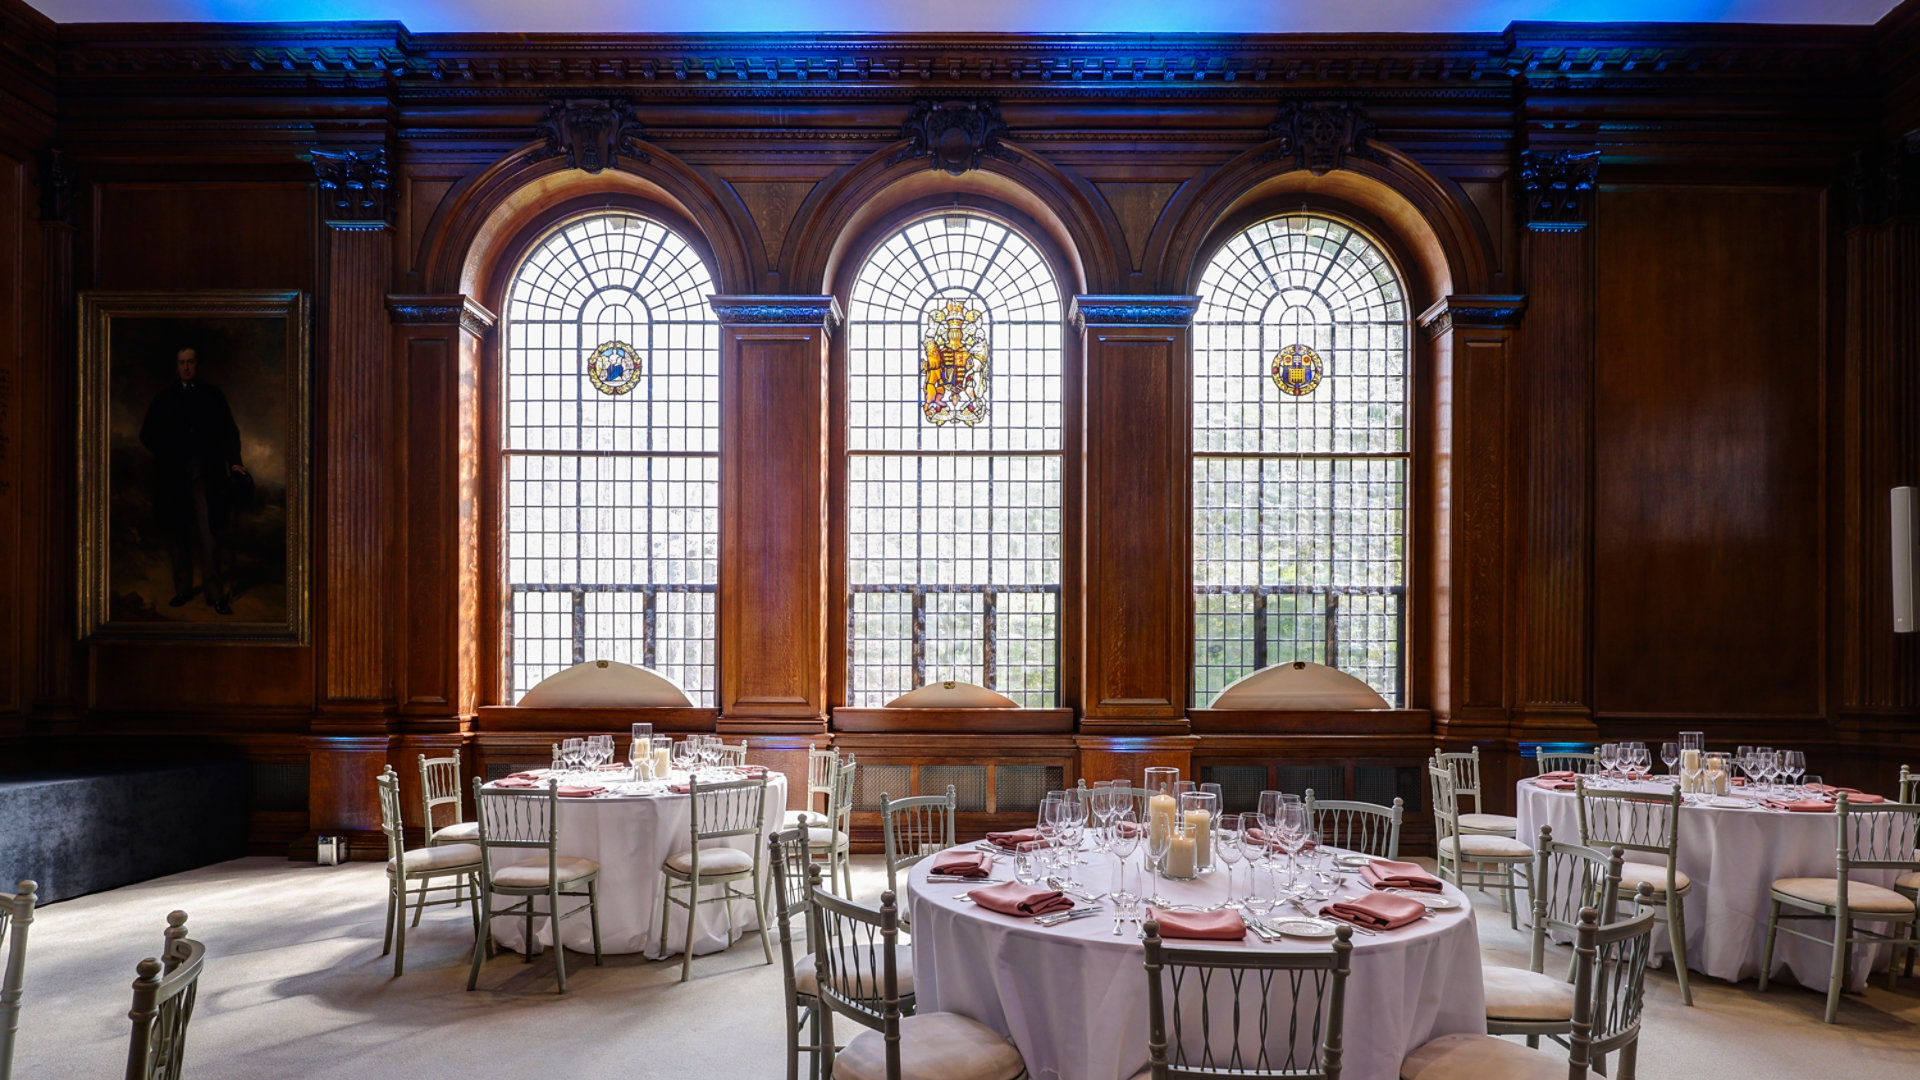 A banqueting hall set up at the RICS offices in London